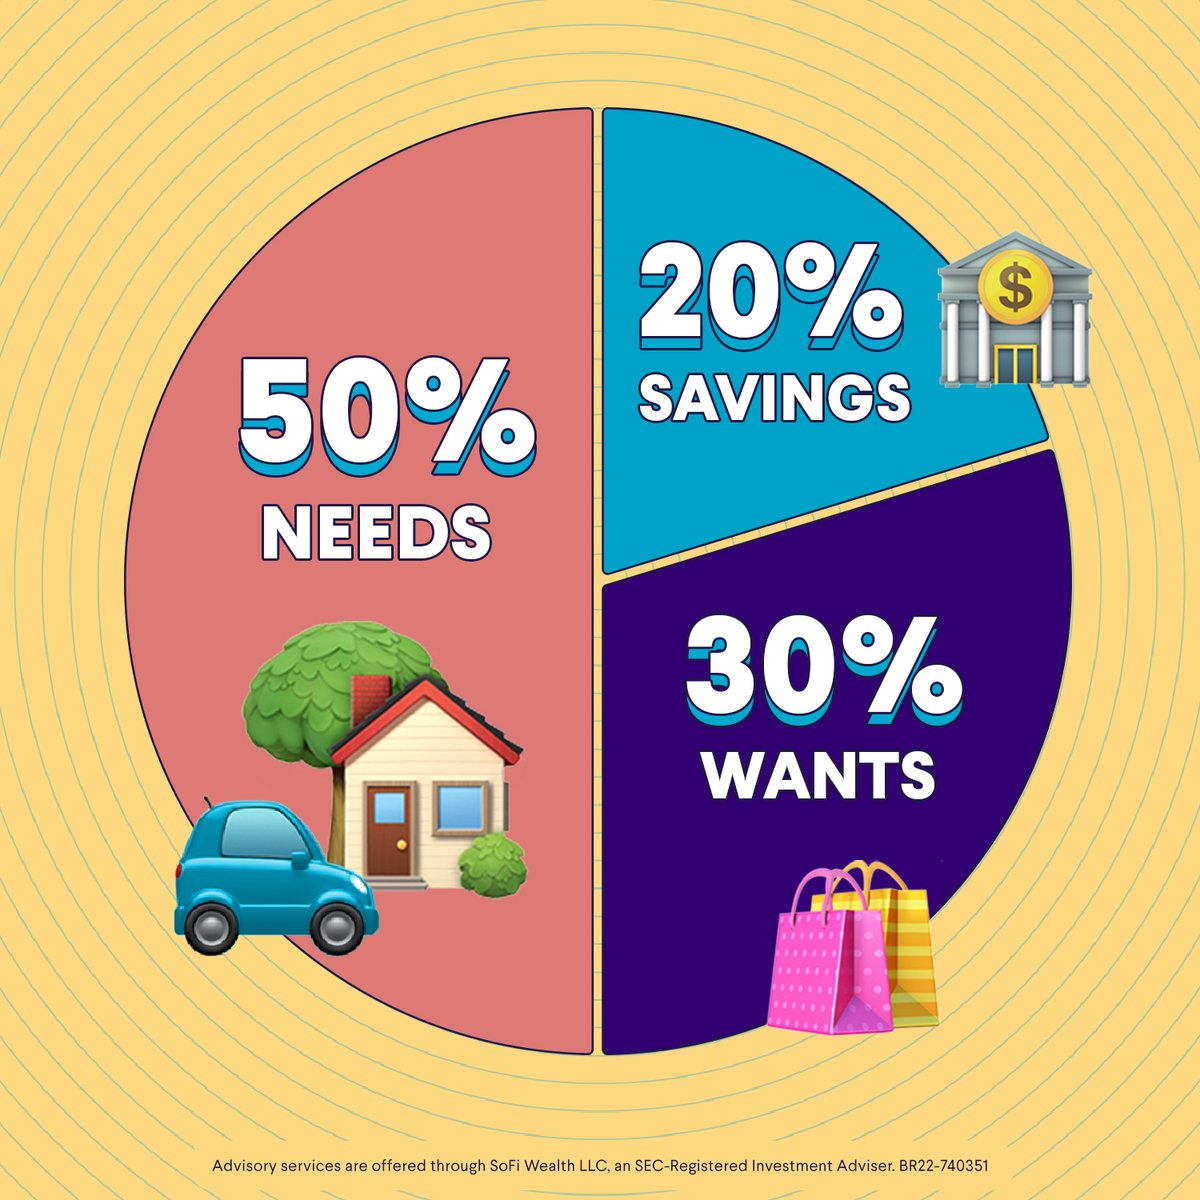 With inflation hitting 7.9%, it’s time to revisit those budgets. The 50/30/20 rule can help make sure your money goes where you need it—50% for needs, 30% for wants, and 20% for savings. Talk to a SoFi Financial planner for help setting up your budget ➡️: bit.ly/3LJty0I